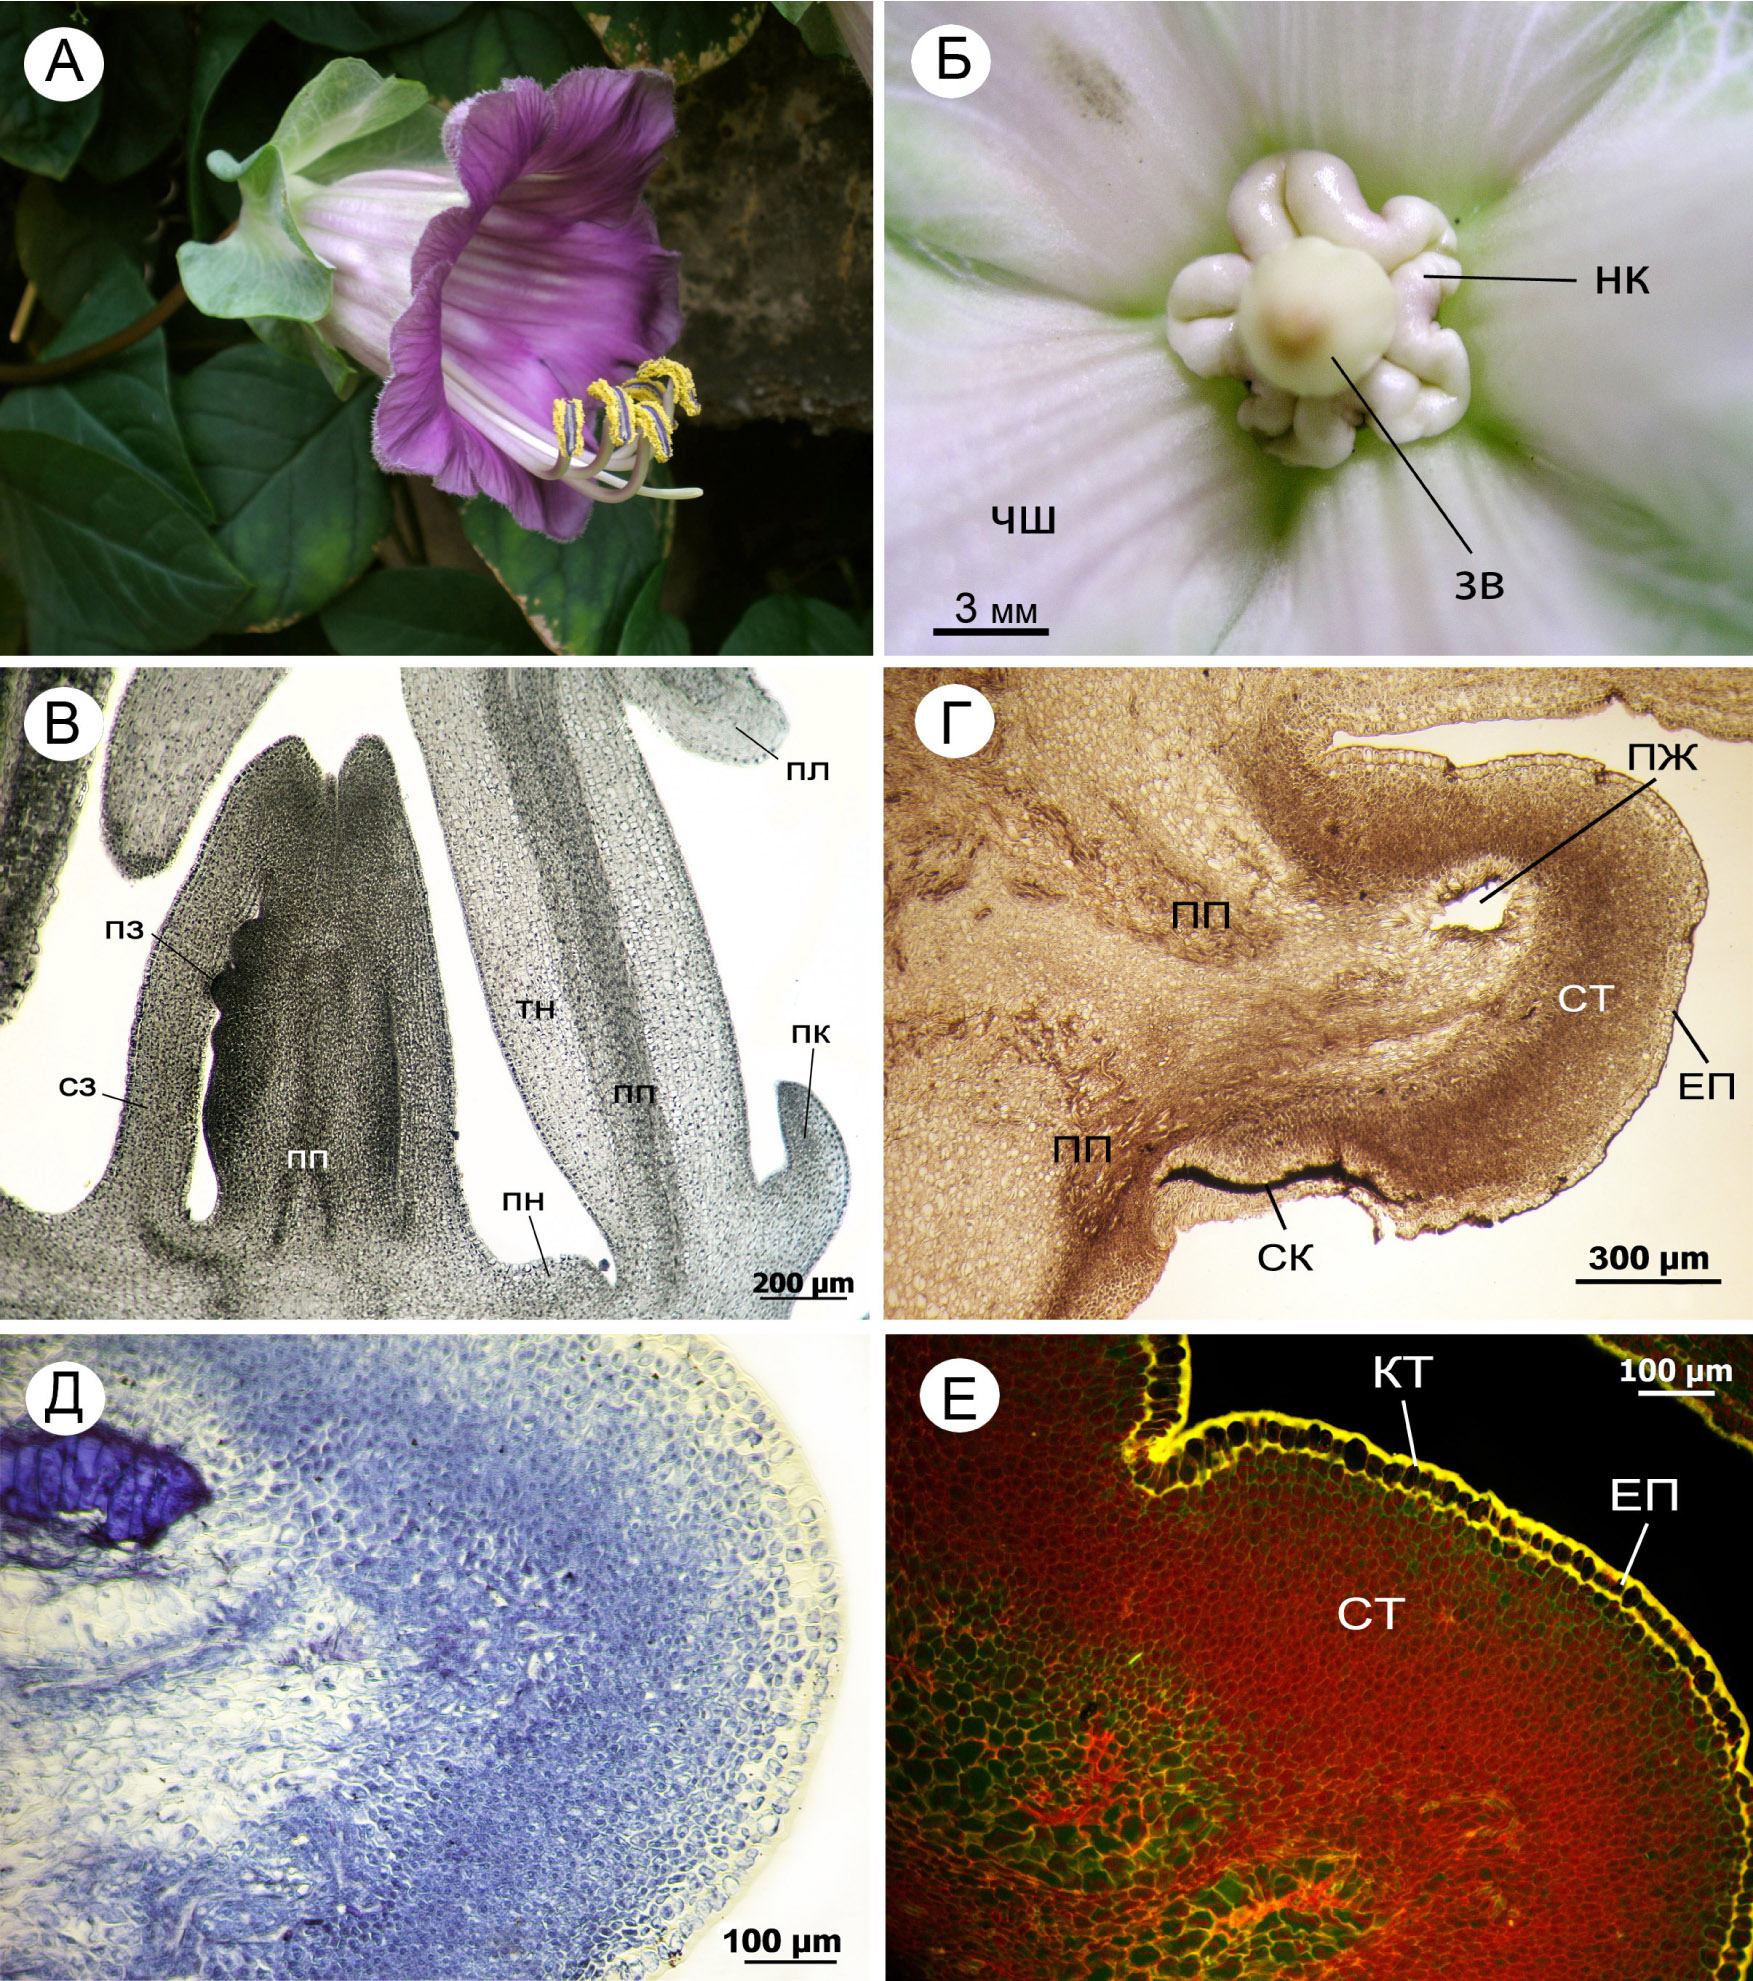 Fig. 1. The structural organization of Cobaea scandens generative organs: A – flower common view, Б – intrastaminal nectary: чш – sepals, зв – ovary, нк – nectary; B – longitudinal section of a flower: сз – wall ovary, пз – ovule primordium, тн – stamen thread, pc – petals; пк – petal, пл – nectarial parenchyma, пн – nectary: Г – nectary: пп – vascular bundles; еп – epidermis, ст – secretory tissue, ск – secretory cells with dense cytoplasm, пе – vascular elements; пж – the central cavity (hematoxylin stained), Д – localization of the protein in the cells of nectaries (blue color – the reaction of the protein to bromophenol blue in the presence of mercuric chloride), E – nectary: ст – secretory tissue (red fluorescence – localization of RNA in nectary secreting tissue), кт – cuticle (yellow fluorescence – deposition of cutin), eп – epidermis (akridin. orange., conc. 1:10000).